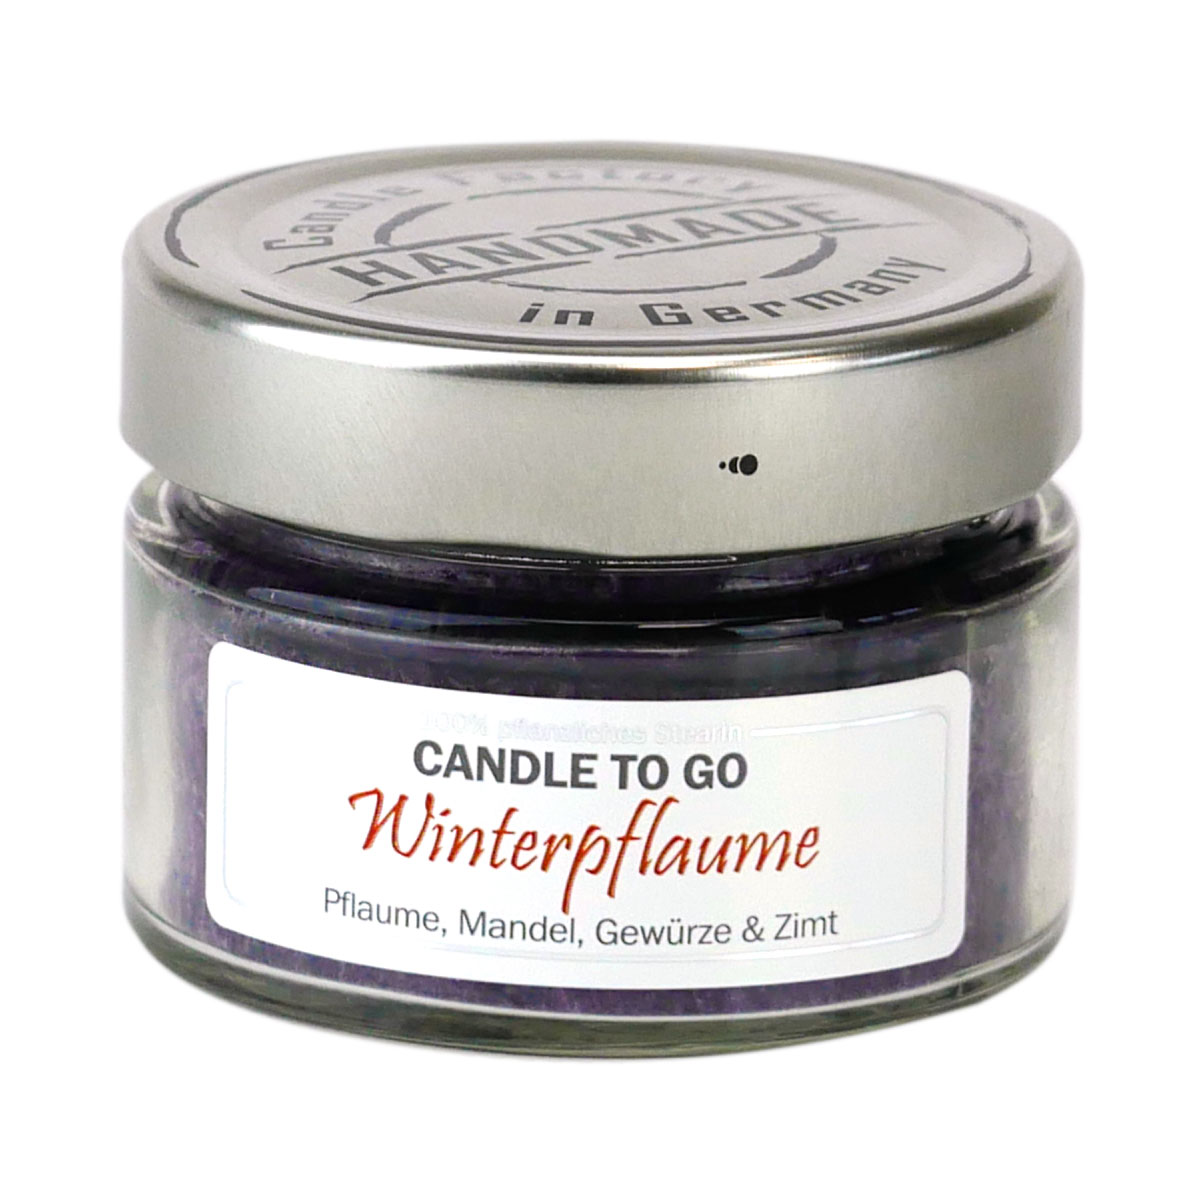 Winterpflaume - Candle to Go Duftkerze von Candle Factory